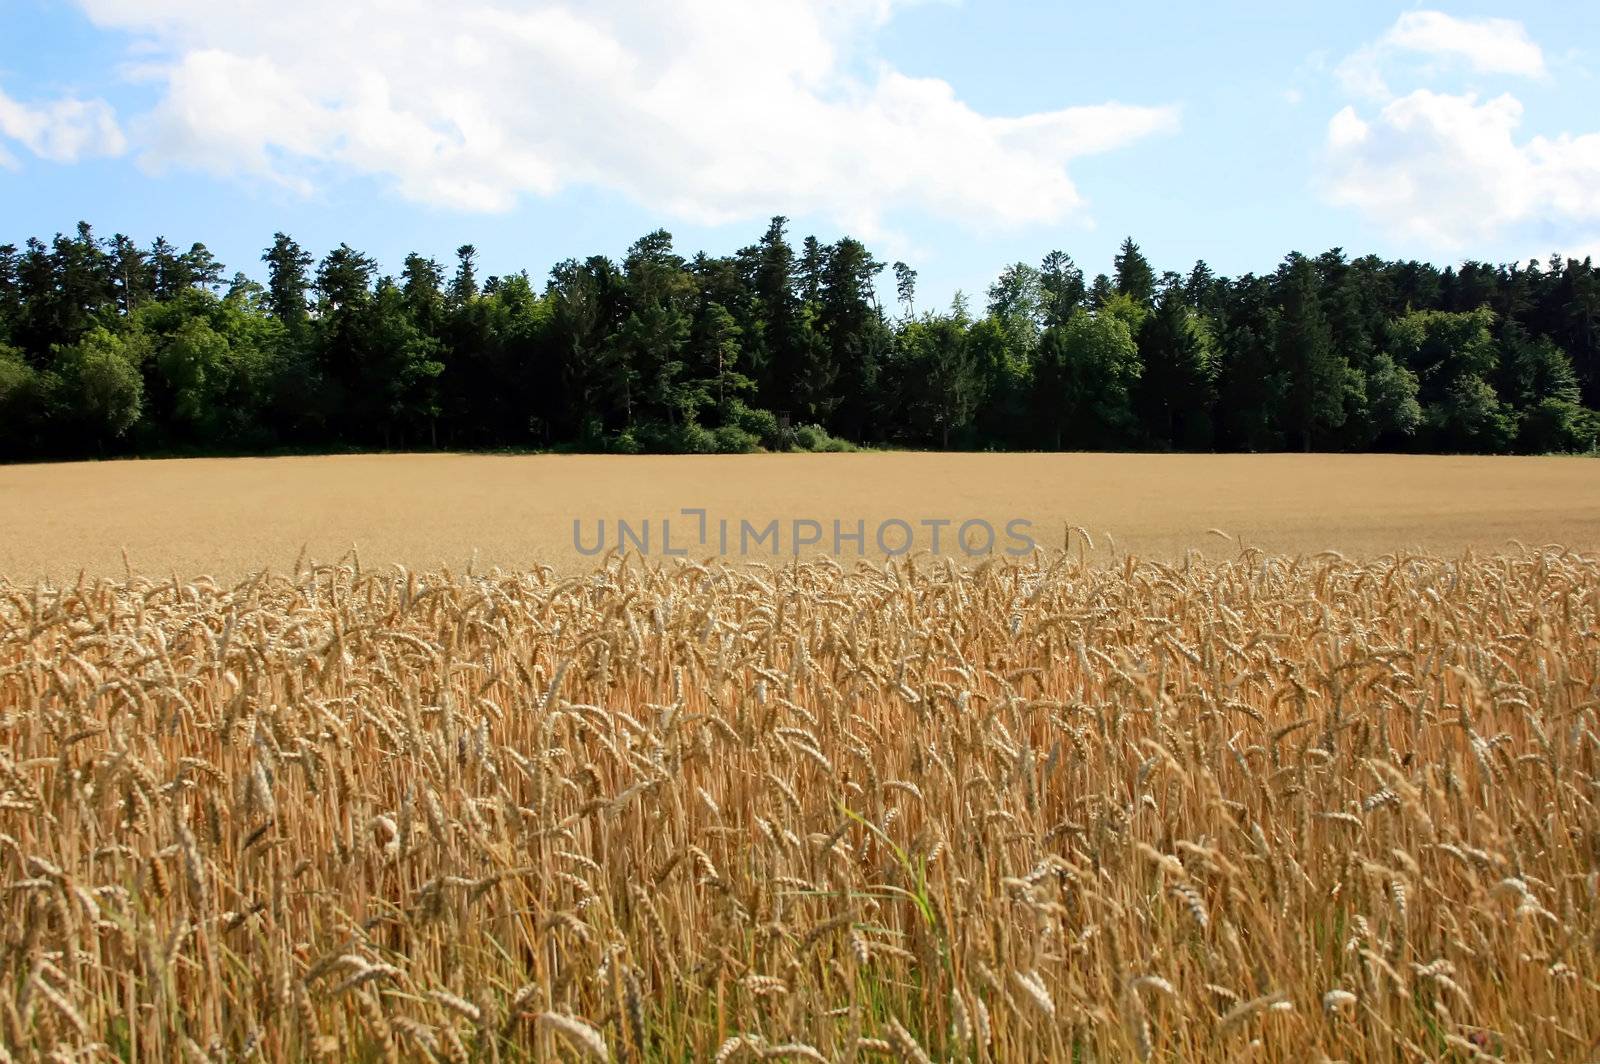 This image shows a cornfield with forest in background